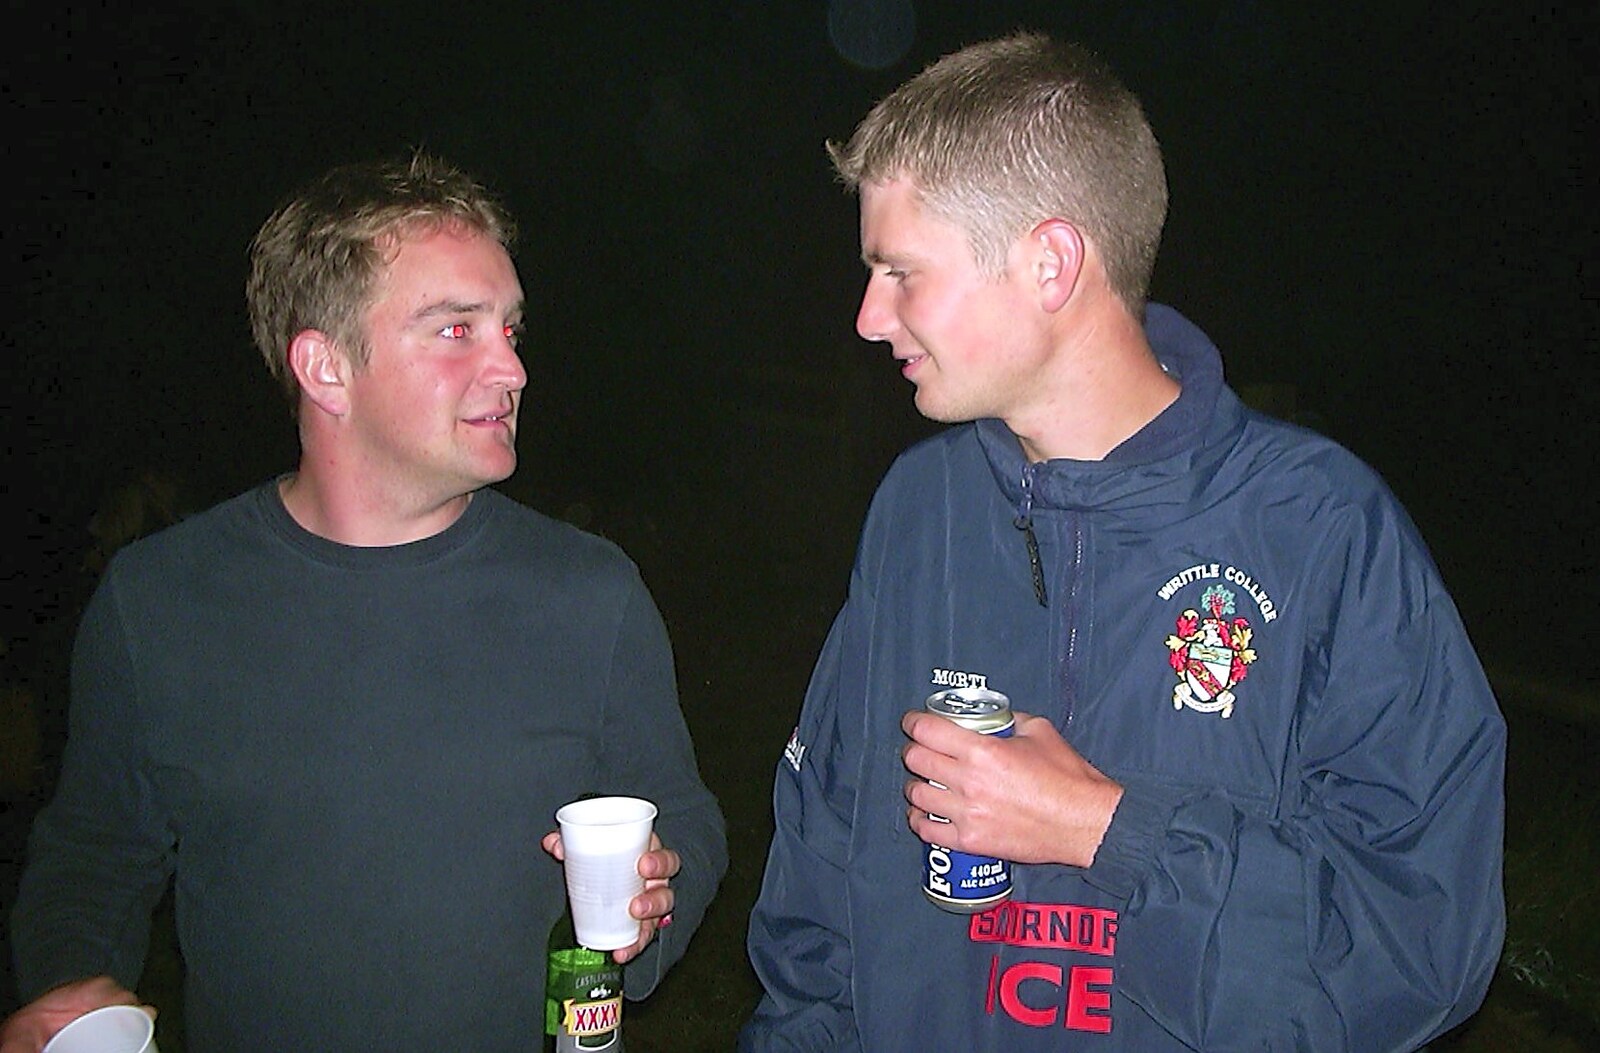 Phil and his mate again from A Mellis Party and the BSCC at Wortham, Suffolk - 5th September 2003